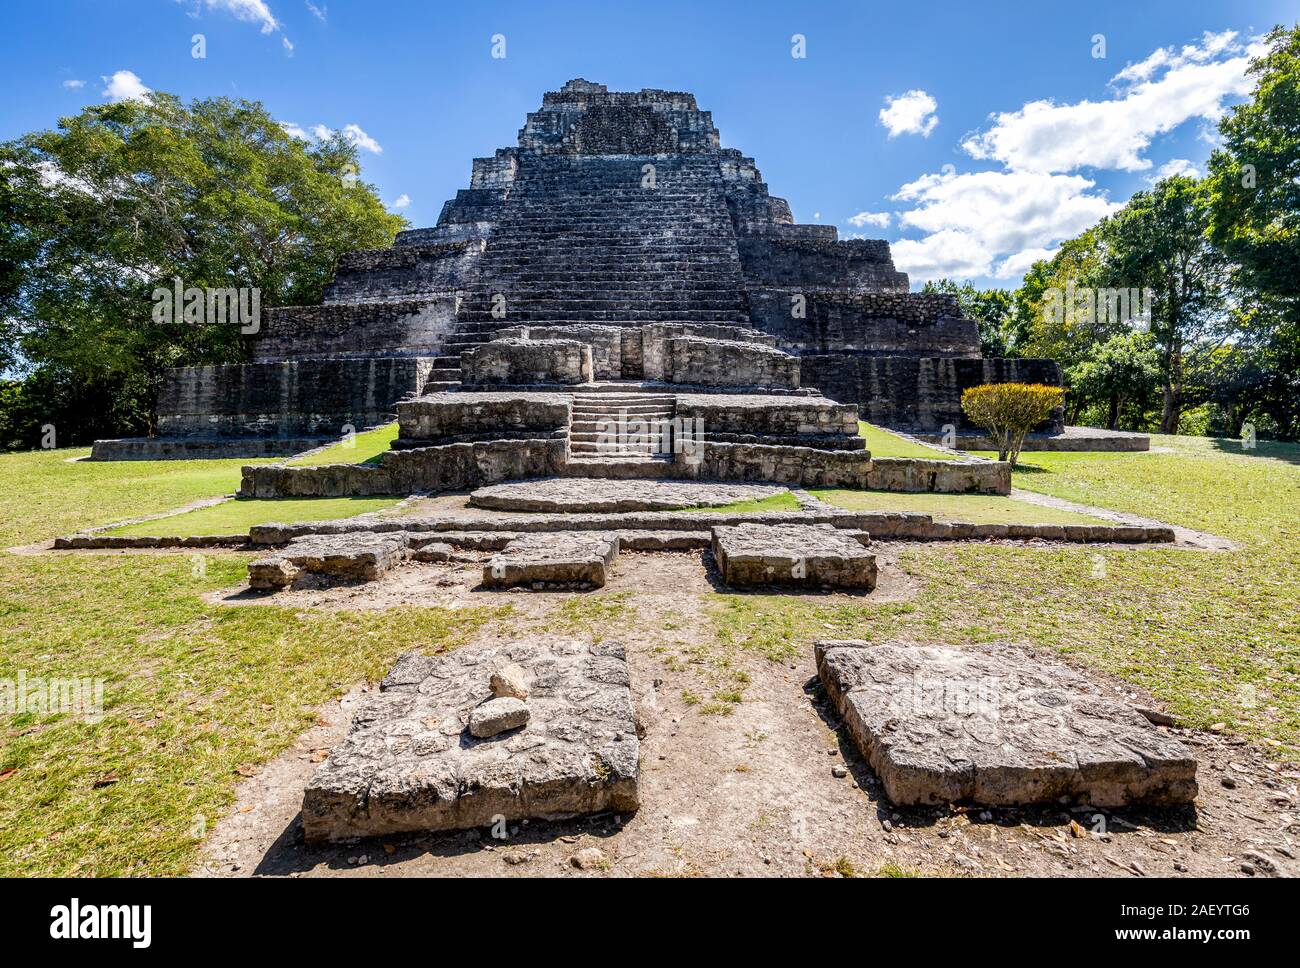 The Mayan ruins of Chaacchoben in Quintana Roo, Mexico. Stock Photo